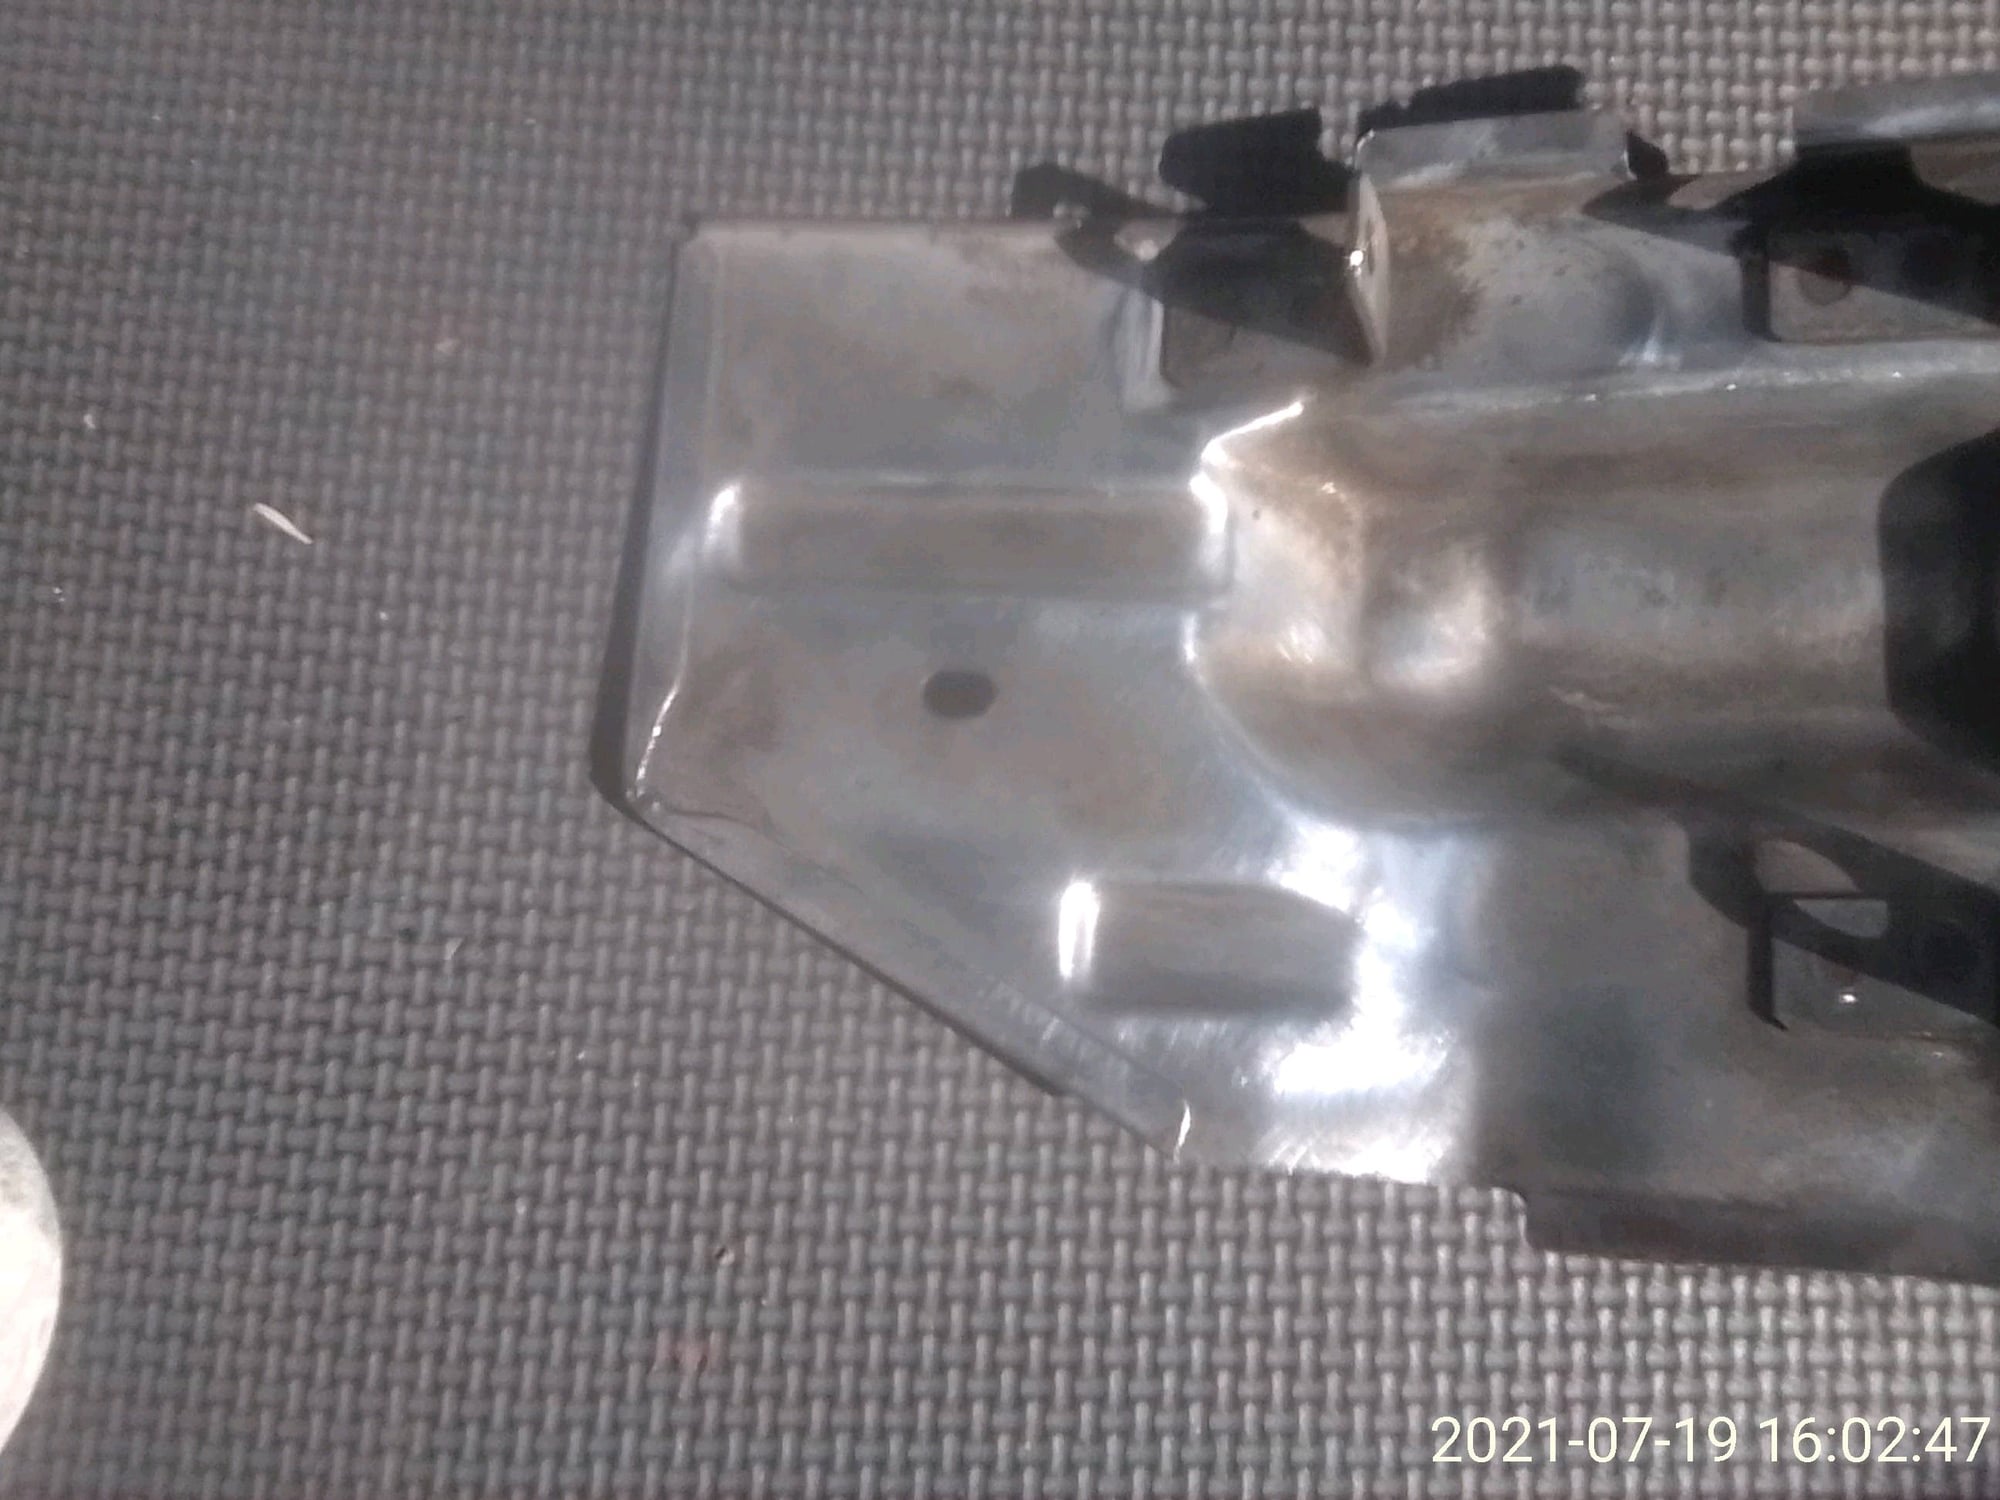 Miscellaneous - FD - OEM Motor Mount Cover Plate - Used - 1993 to 1995 Mazda RX-7 - San Jose, CA 95121, United States